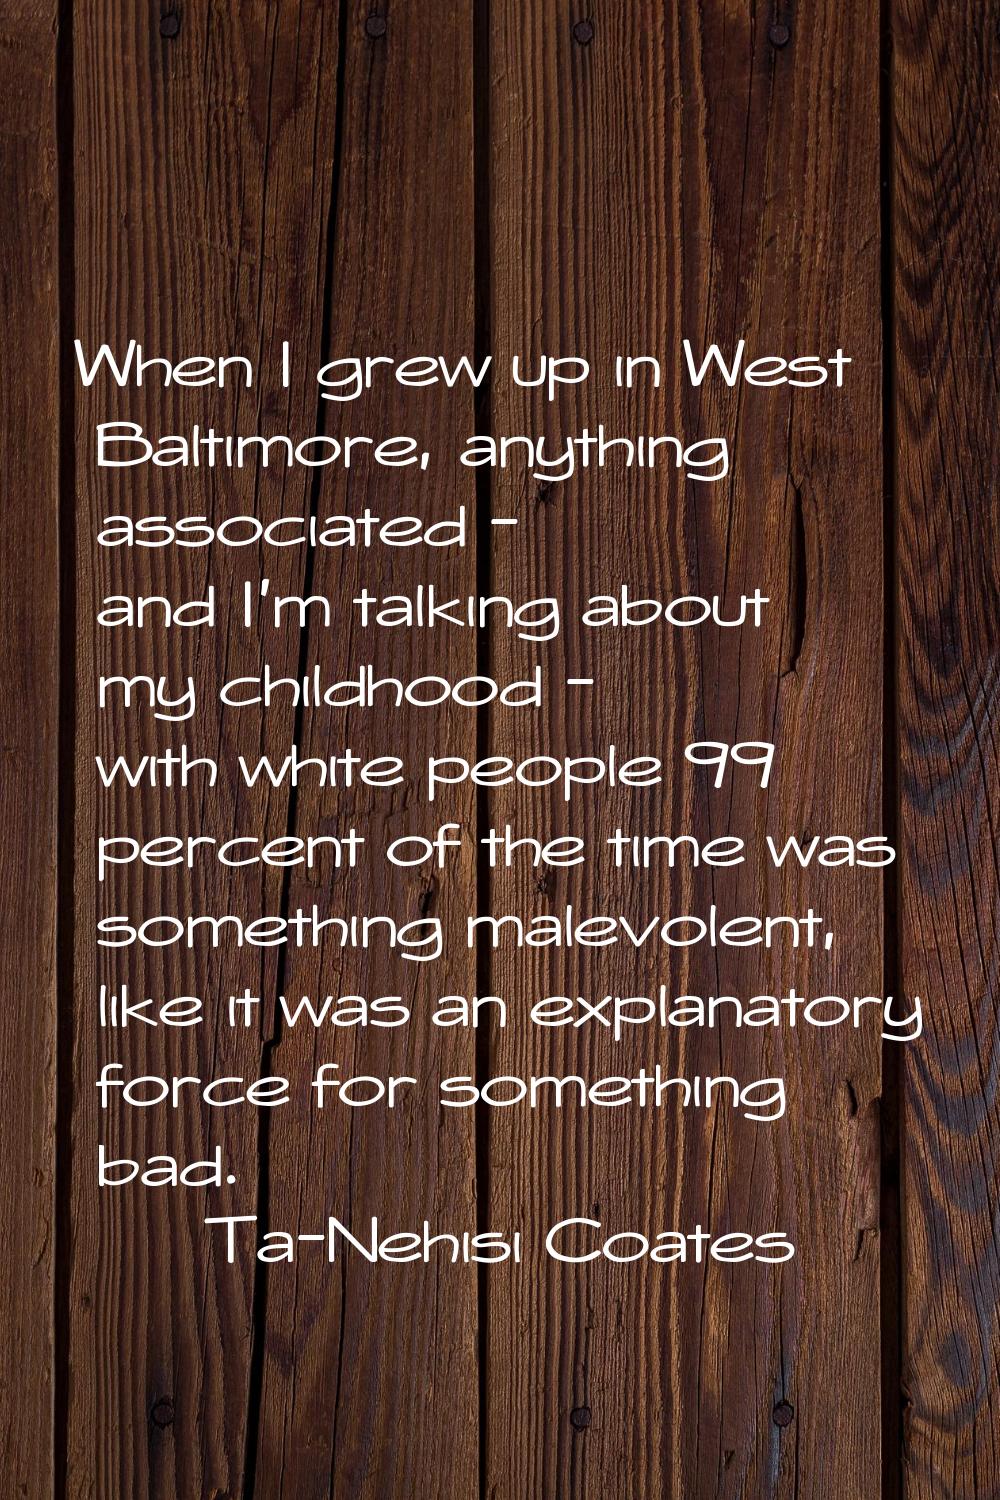 When I grew up in West Baltimore, anything associated - and I'm talking about my childhood - with w